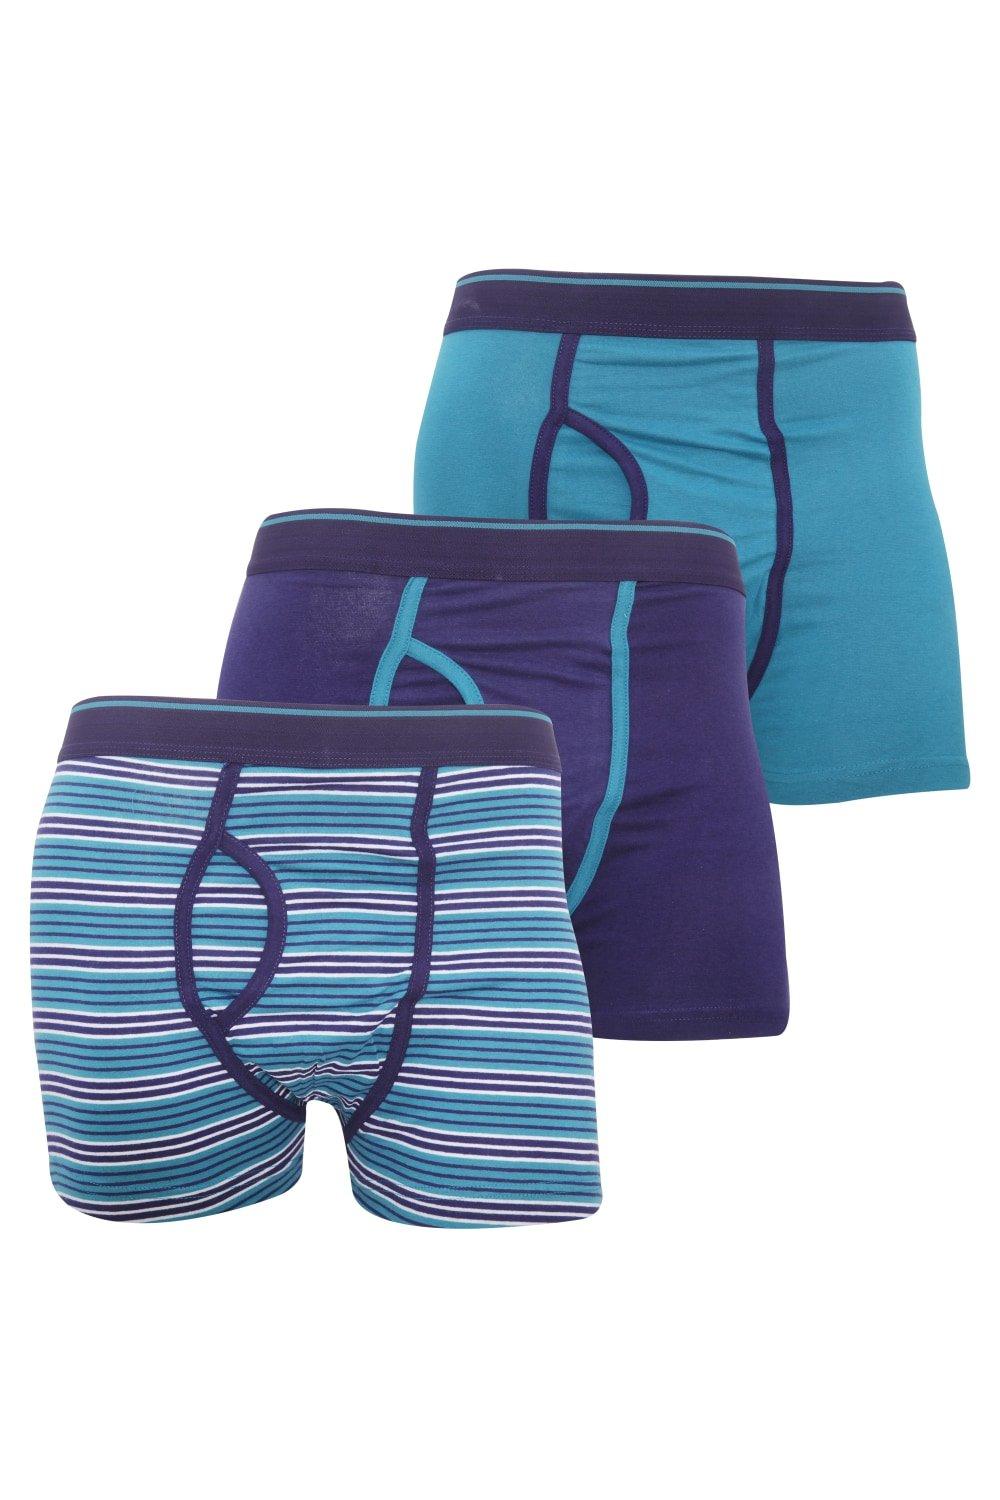 Cotton Mix Key Hole Trunks Underwear (Pack Of 3)